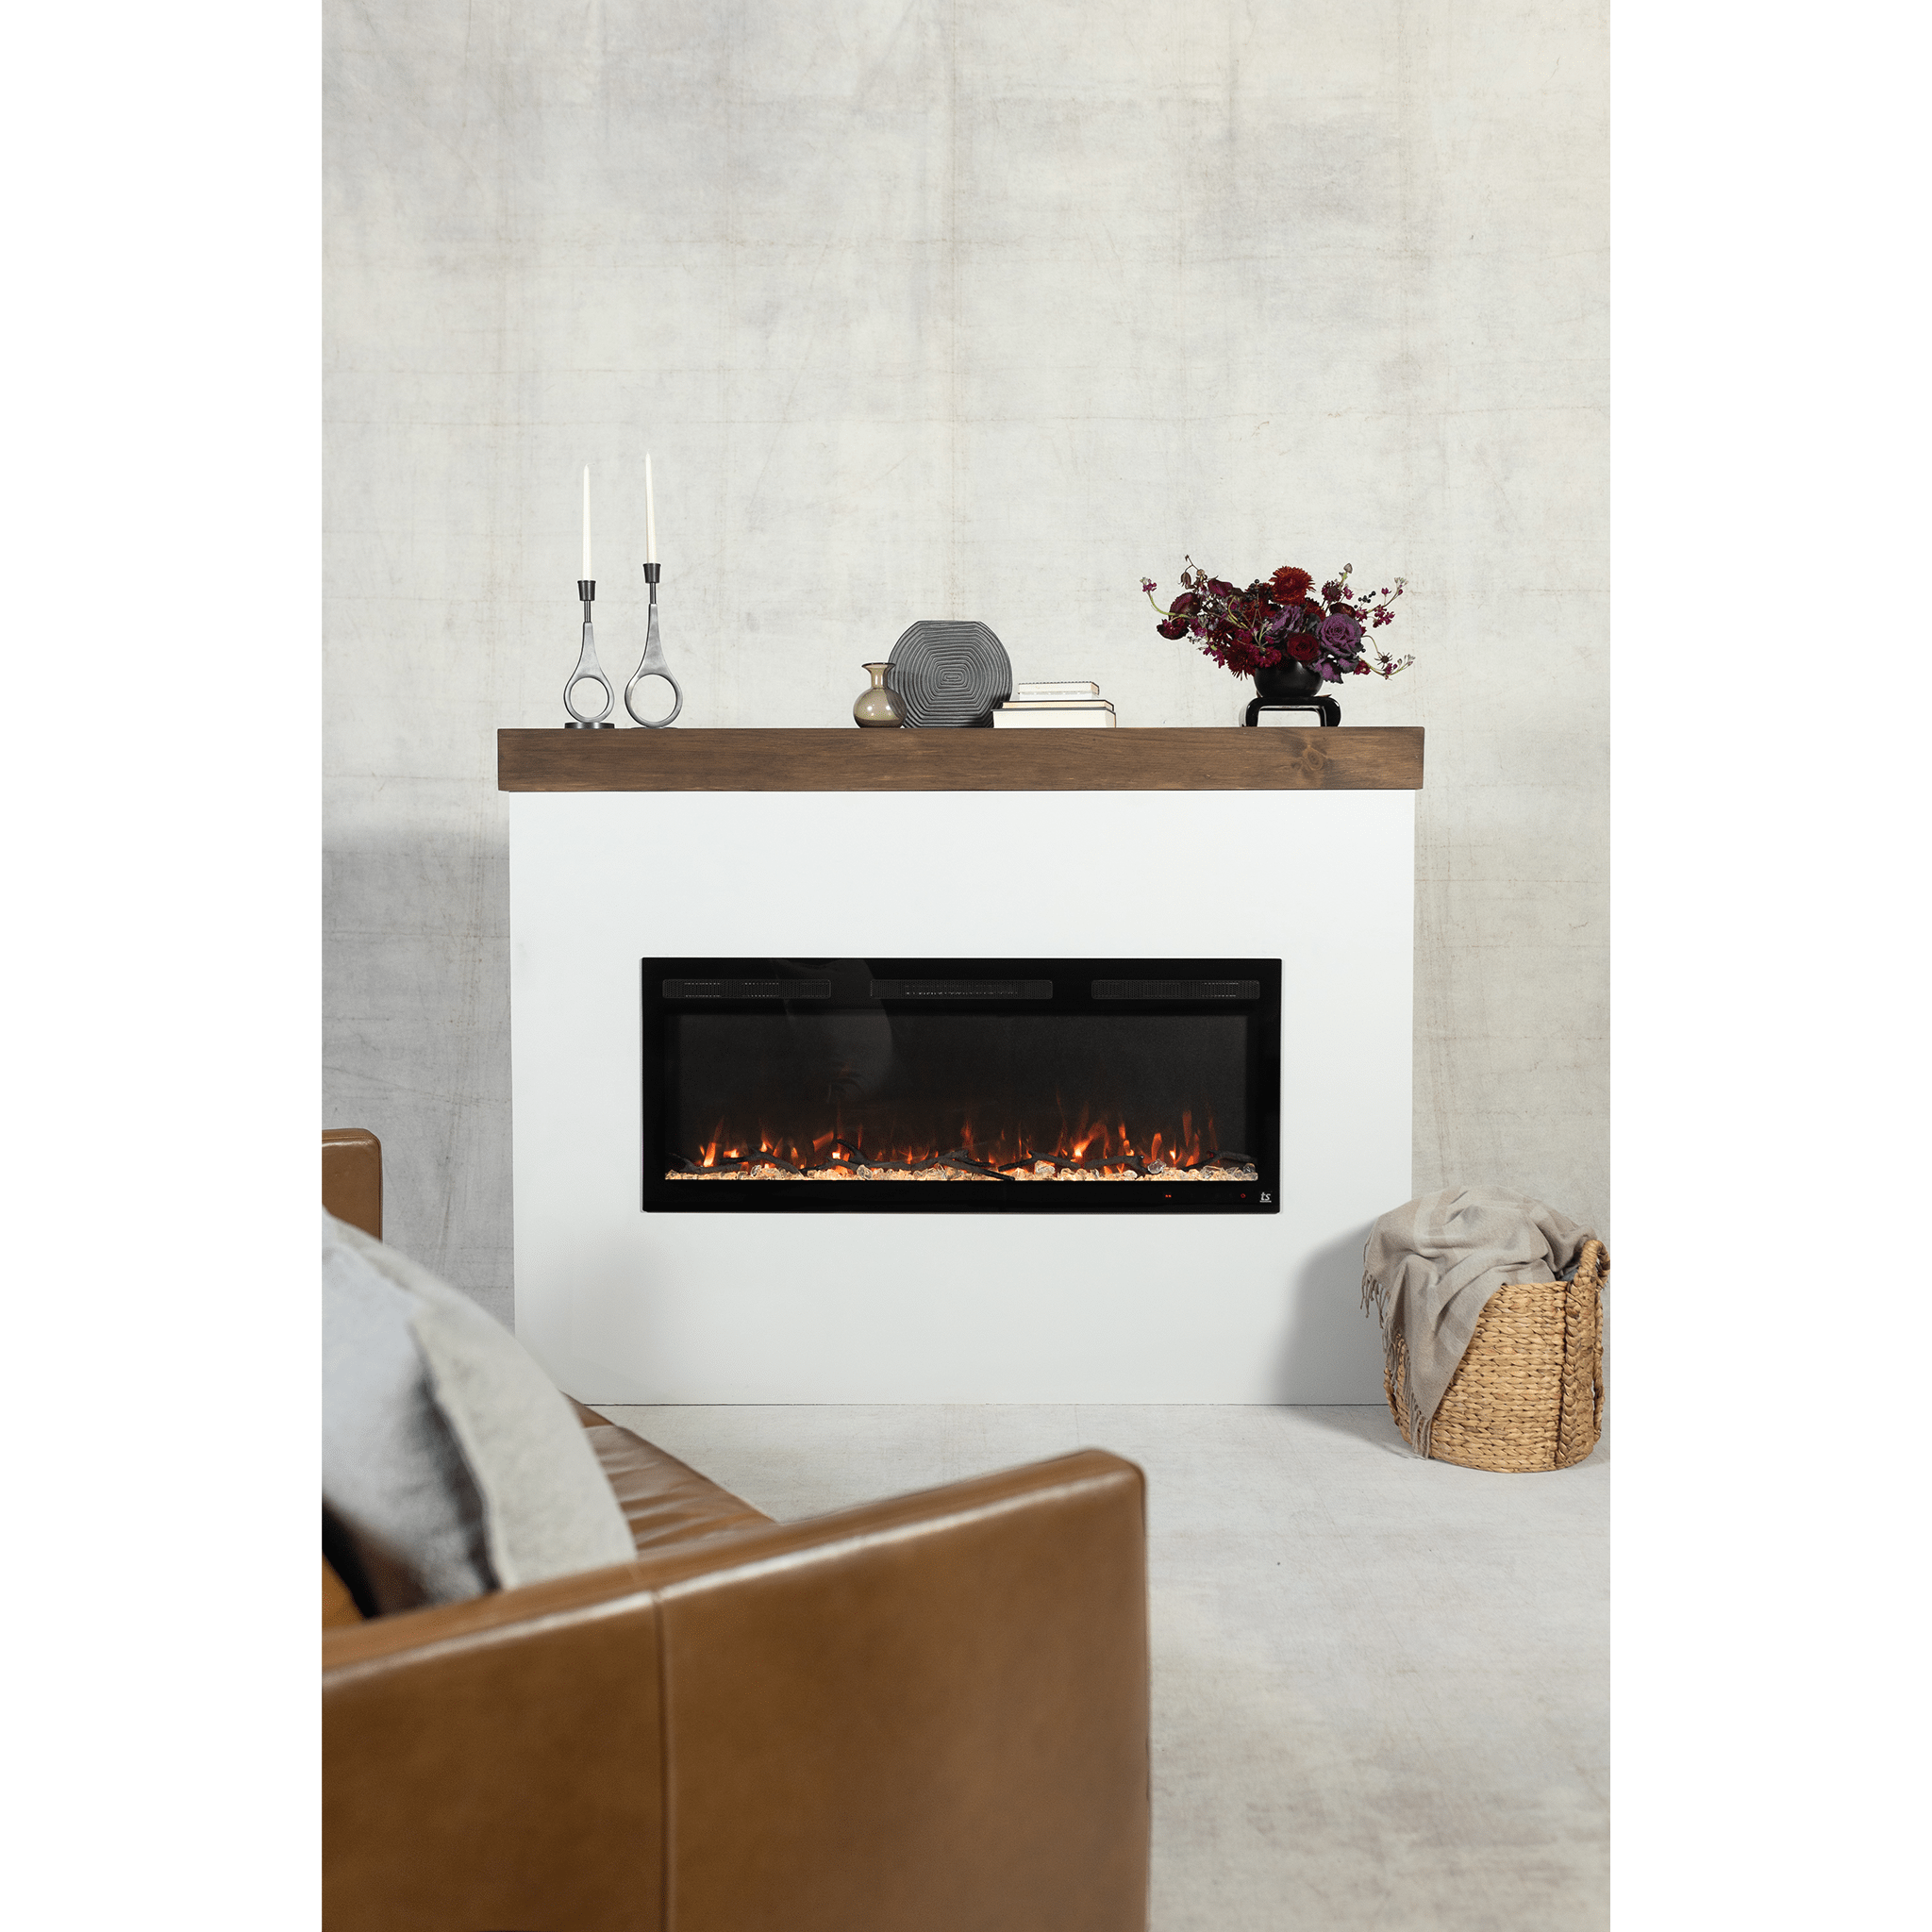 Sideline Fury 46 Inch Electric Fireplace room setting